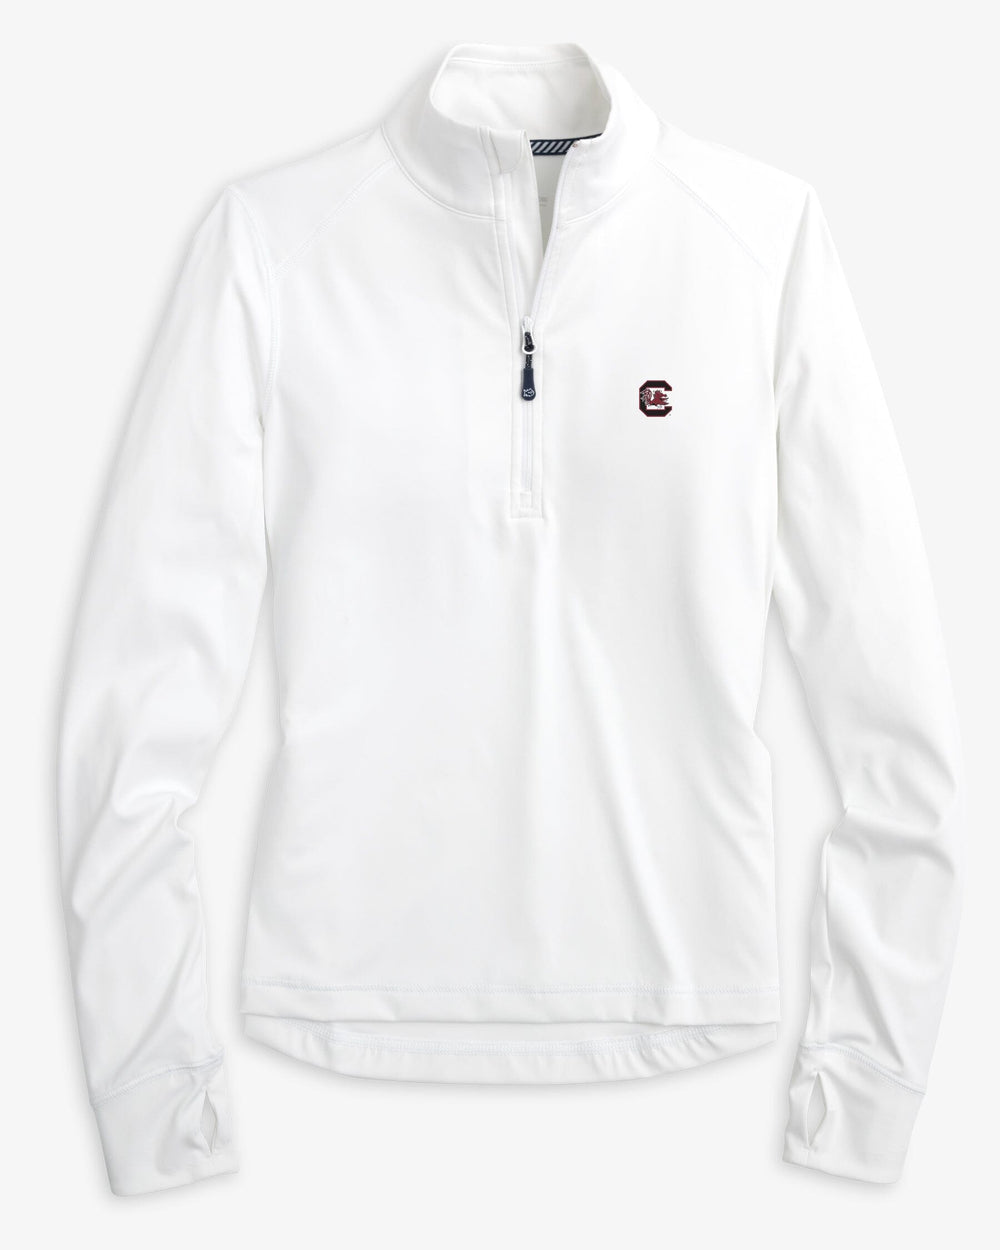 The front view of the South Carolina Gamecocks Runaround Quarter Zip Pull Over by Southern Tide - Classic White